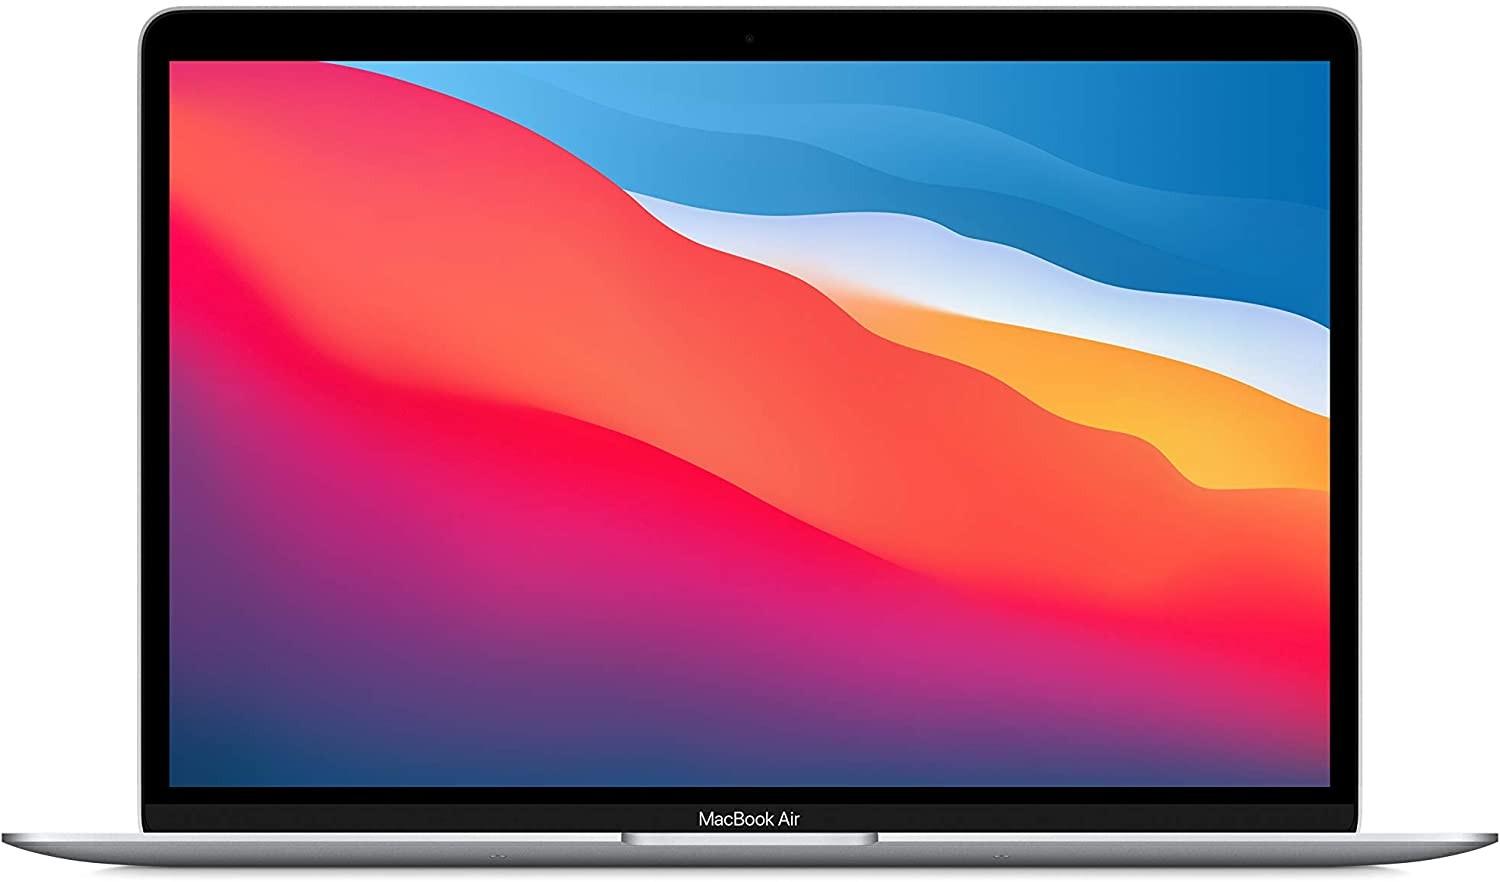 Apple MacBook Air 13.3 inch Retina M1 chip 8-core CPU 8C GPU with 512GB SSD and Silver Color Laptop | MGNA3